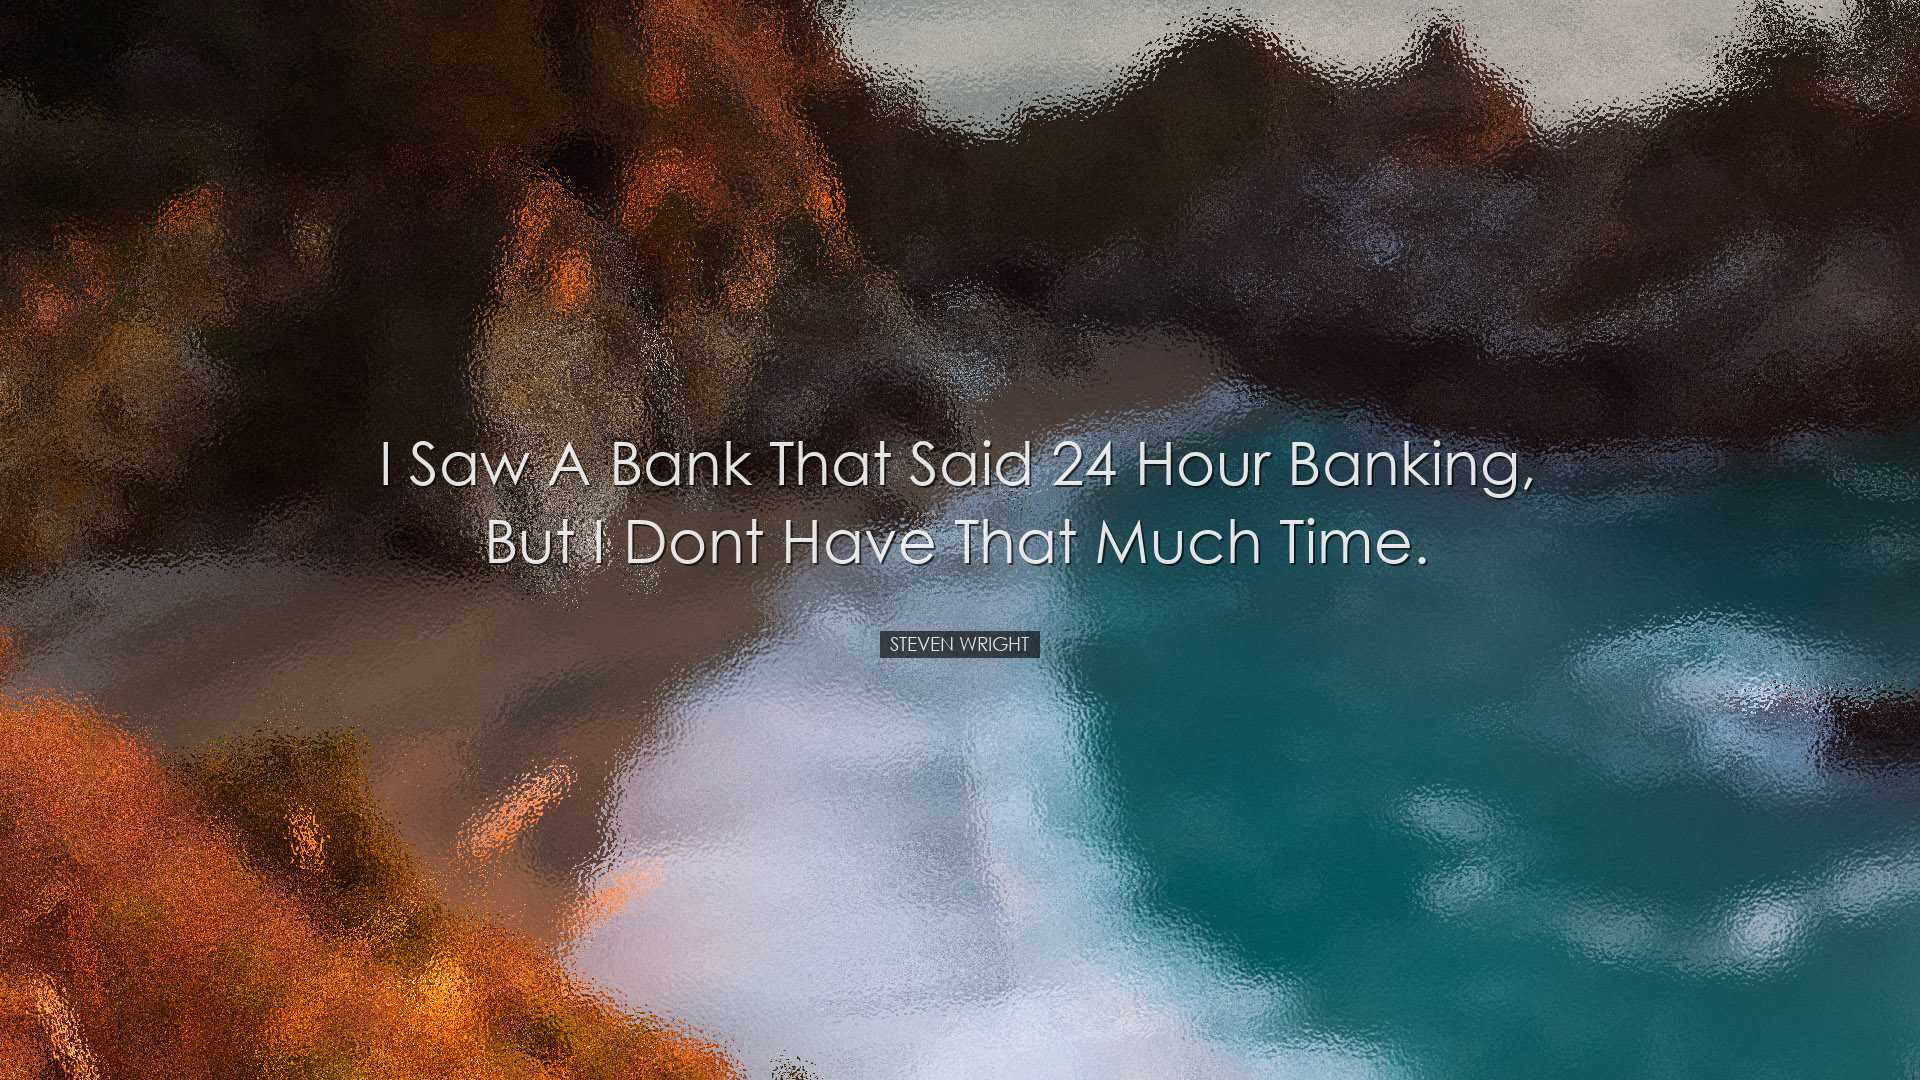 I saw a bank that said 24 Hour Banking, but I dont have that much